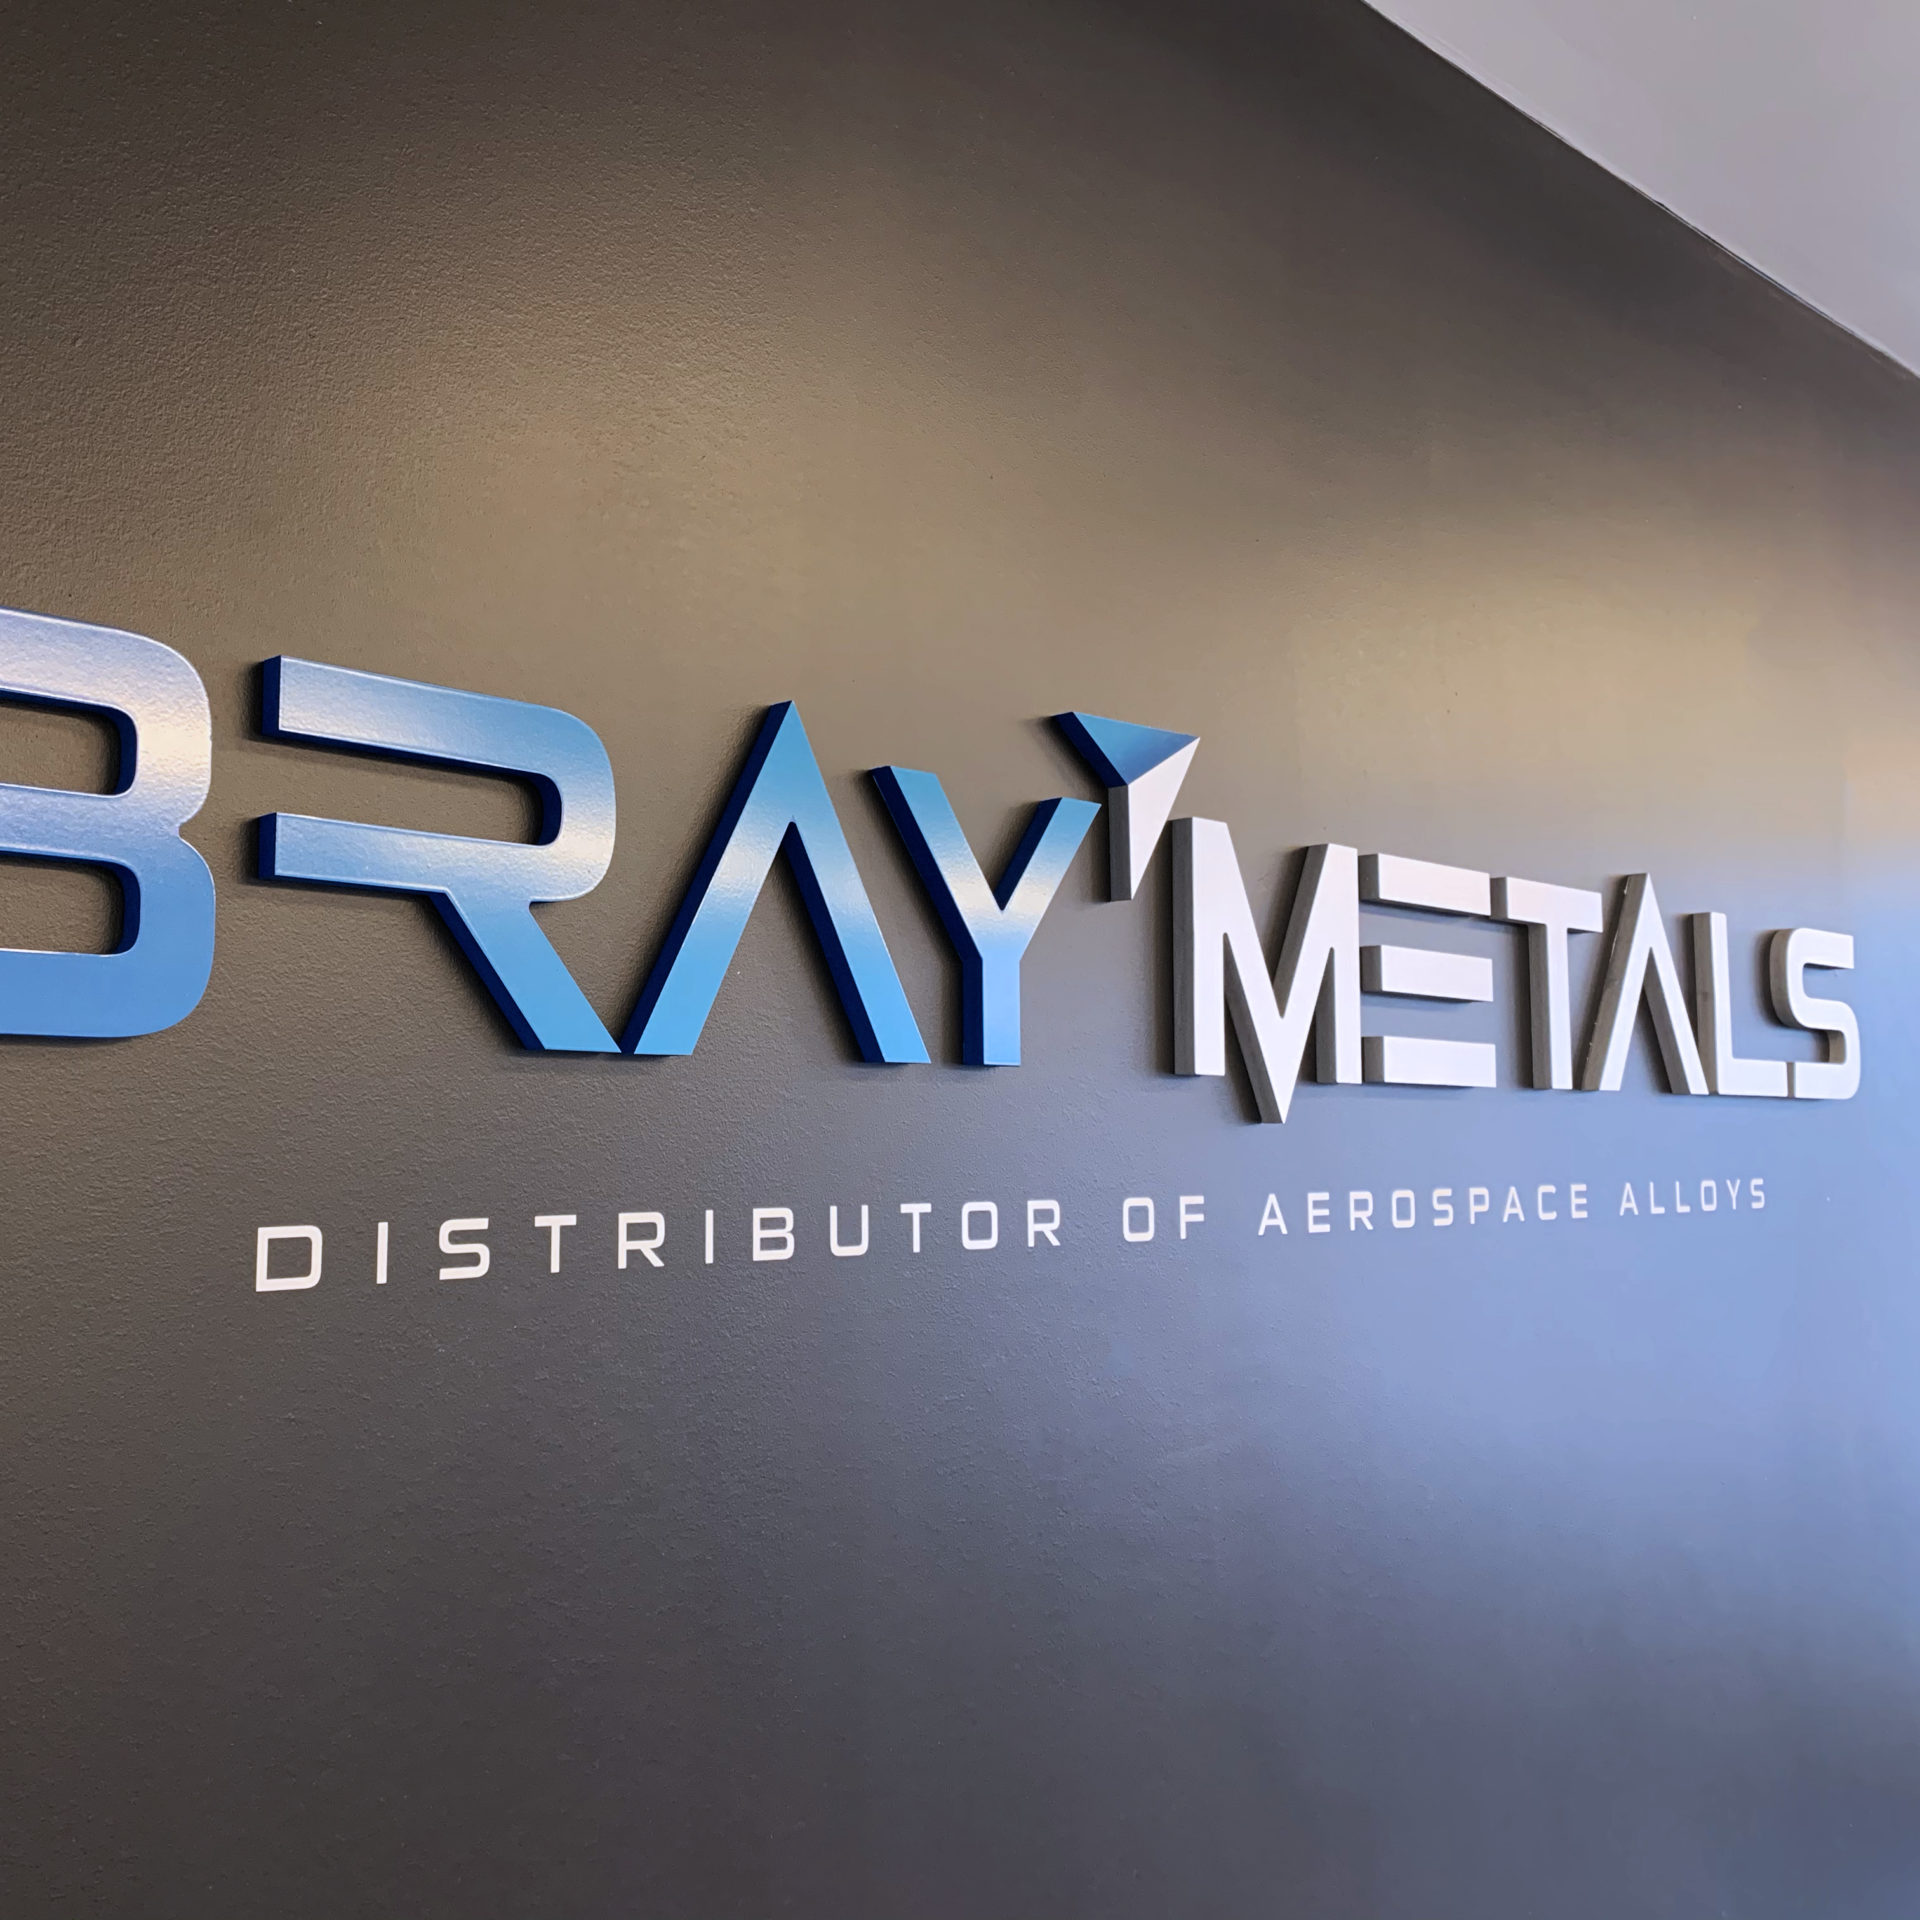 Blue and Silver Bray Metals logo in CNC material hanging on a black wall in the lobby of the company.